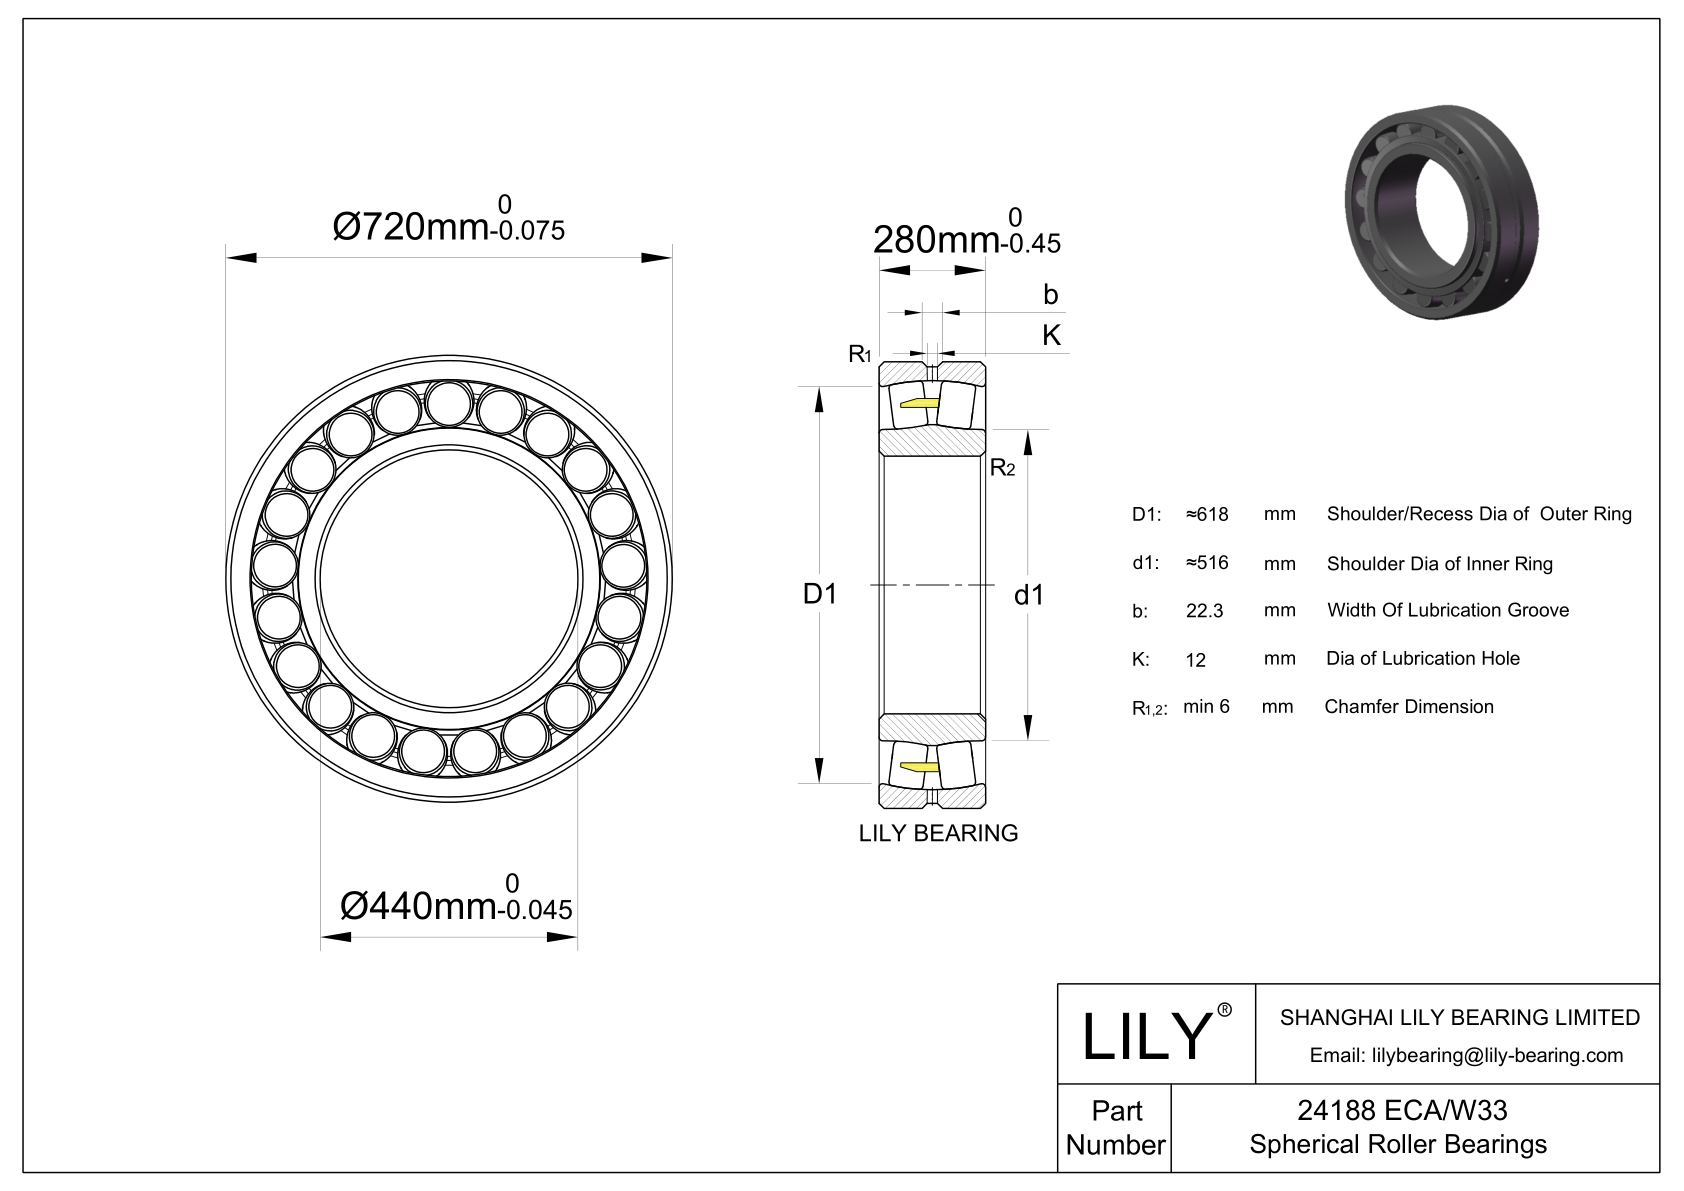 24188 ECA/W33 Double Row Spherical Roller Bearing cad drawing